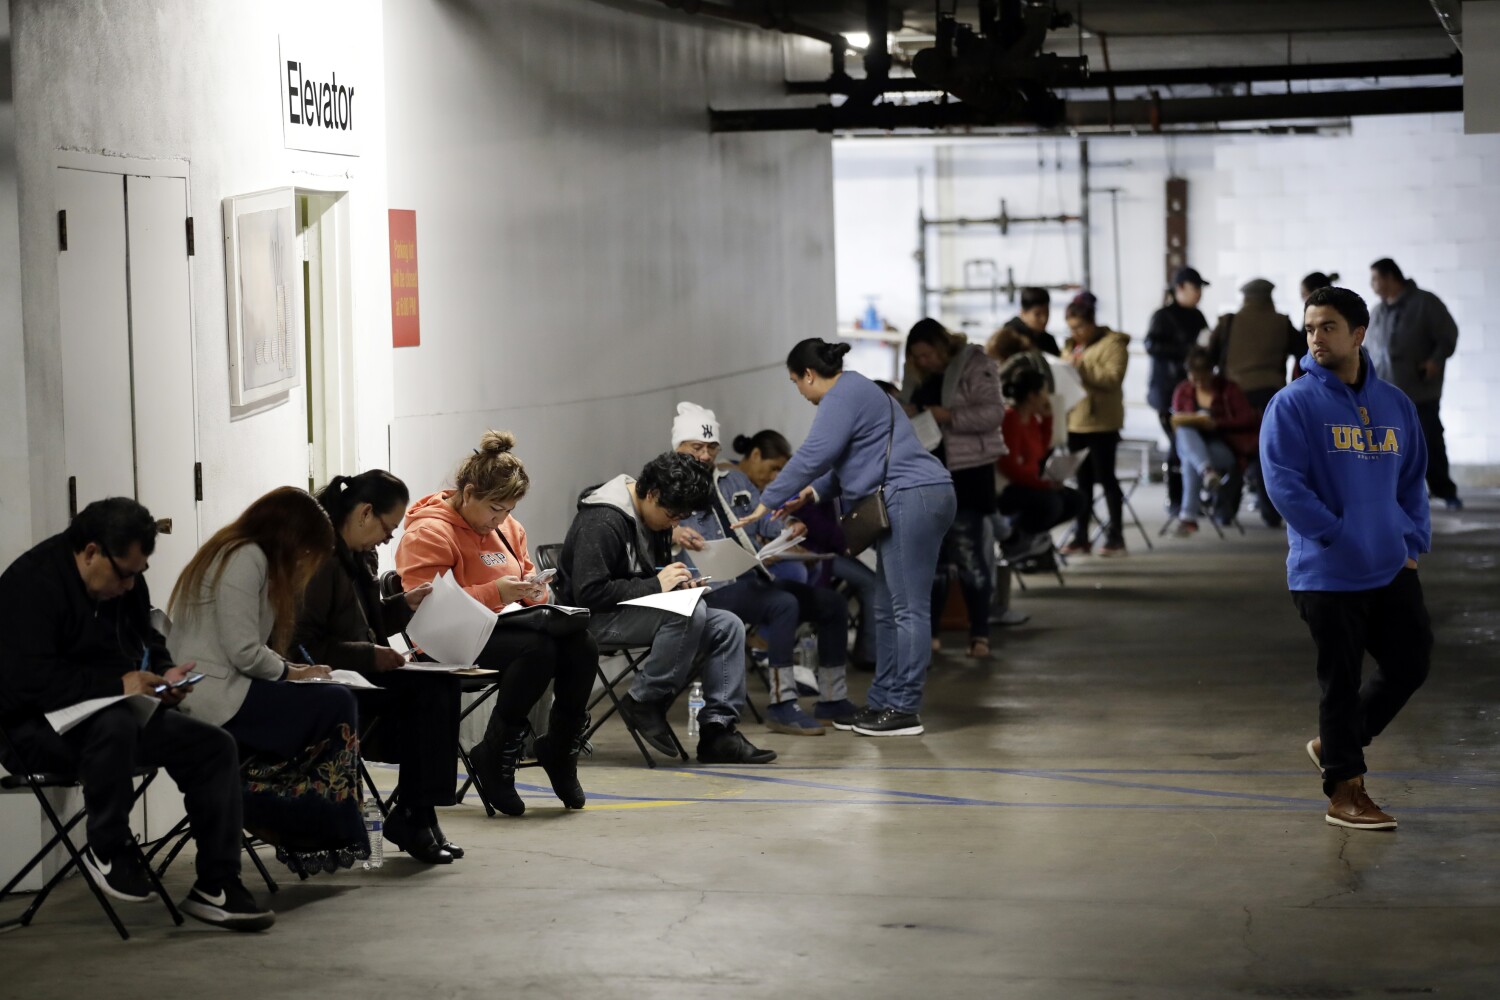 Californians battling unemployment amid coronavirus are stymied by state agency's tech issues